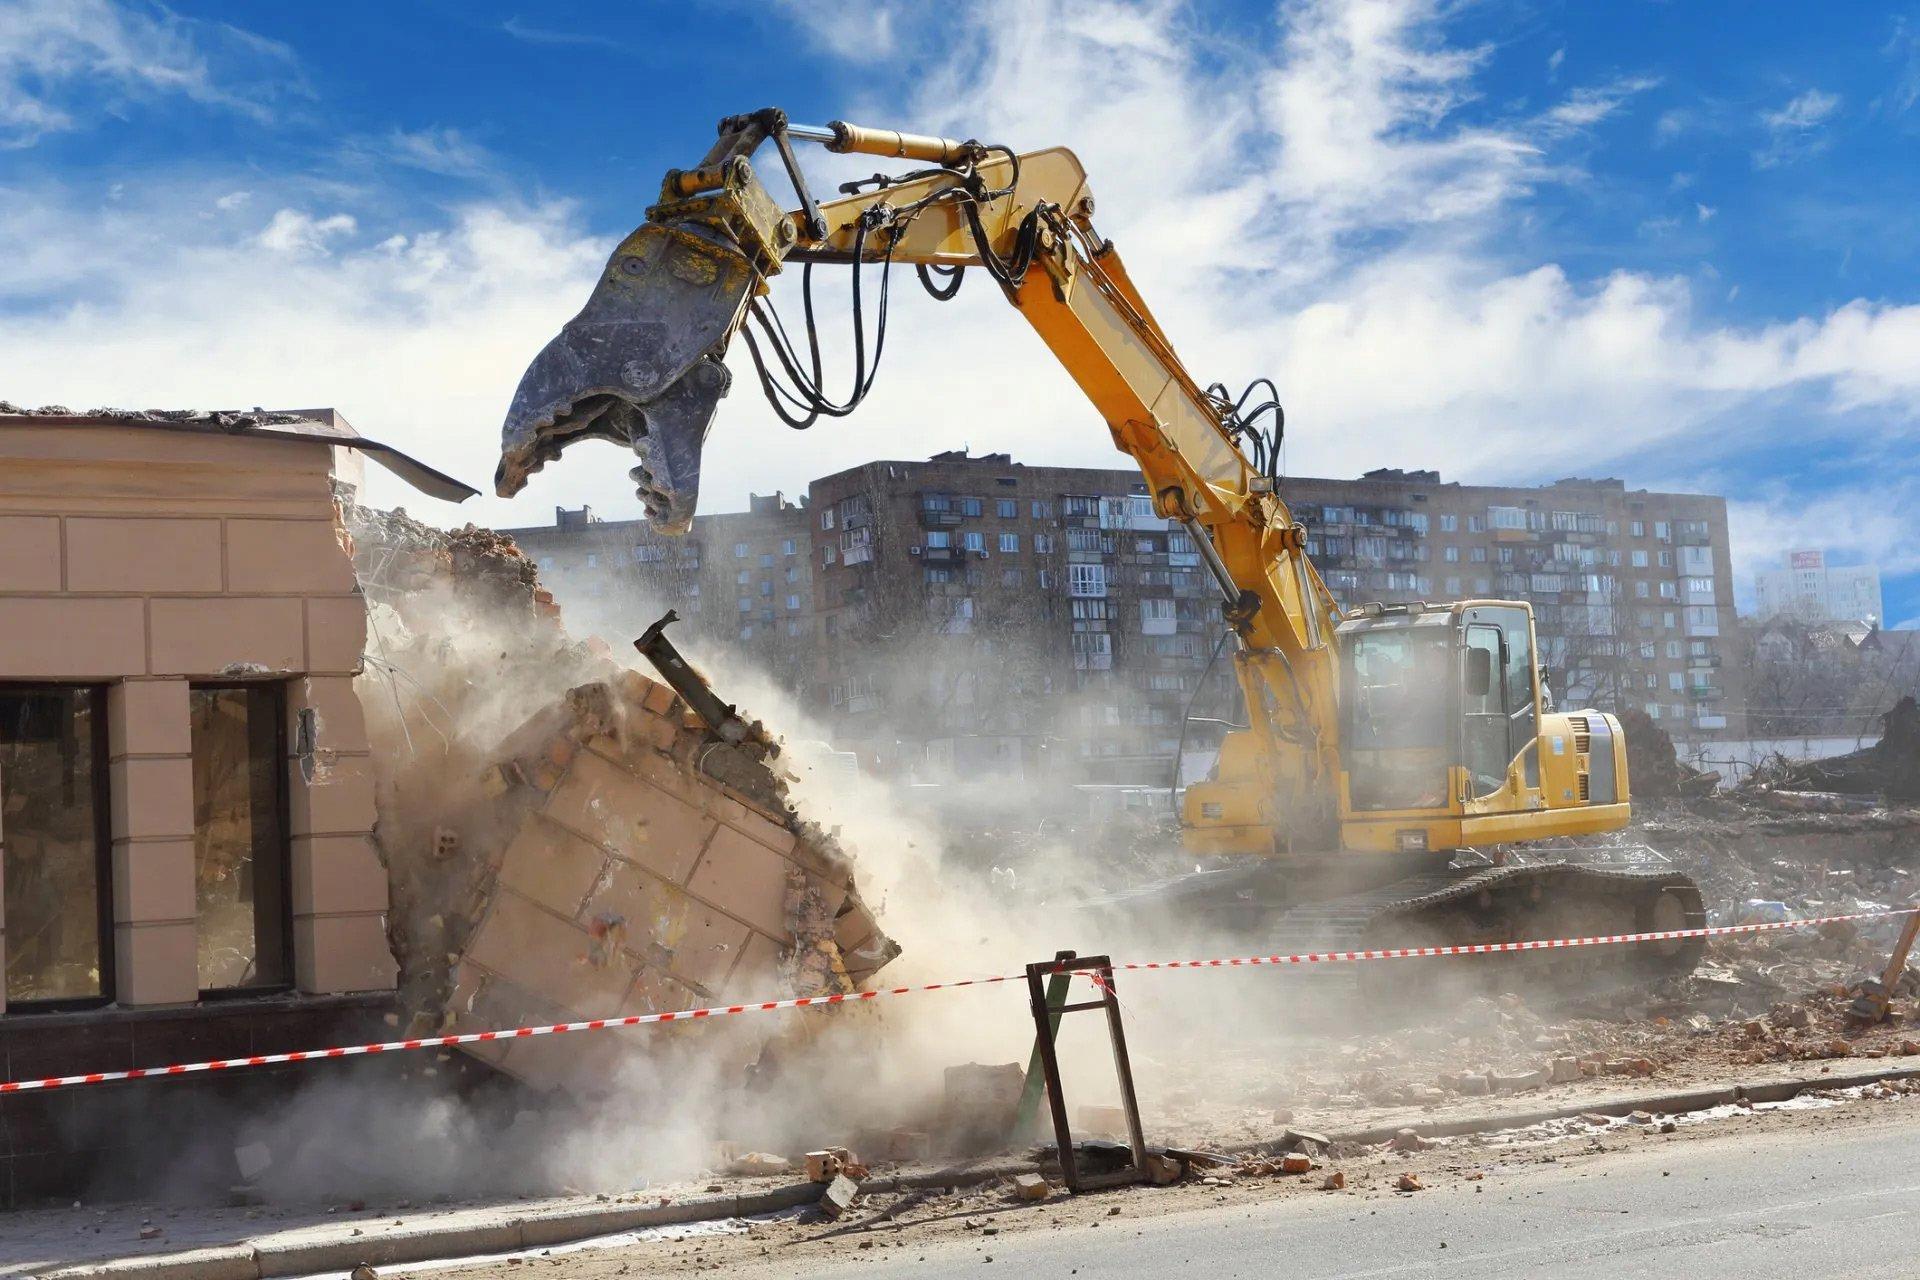 Implement Safety Measures To Complete The Demolition